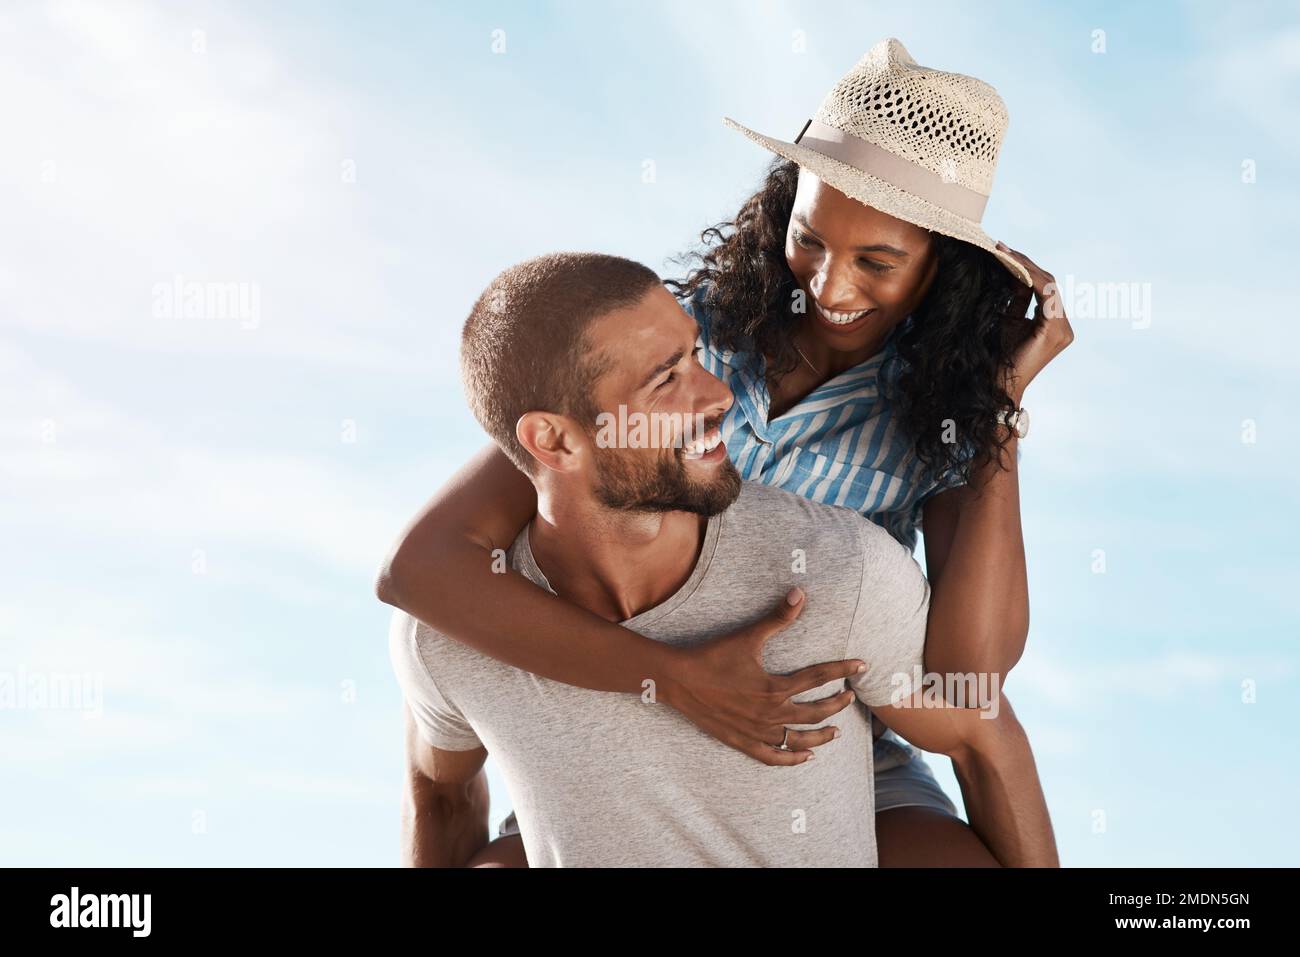 Our love is something special. a young man piggybacking his girlfriend at the beach. Stock Photo